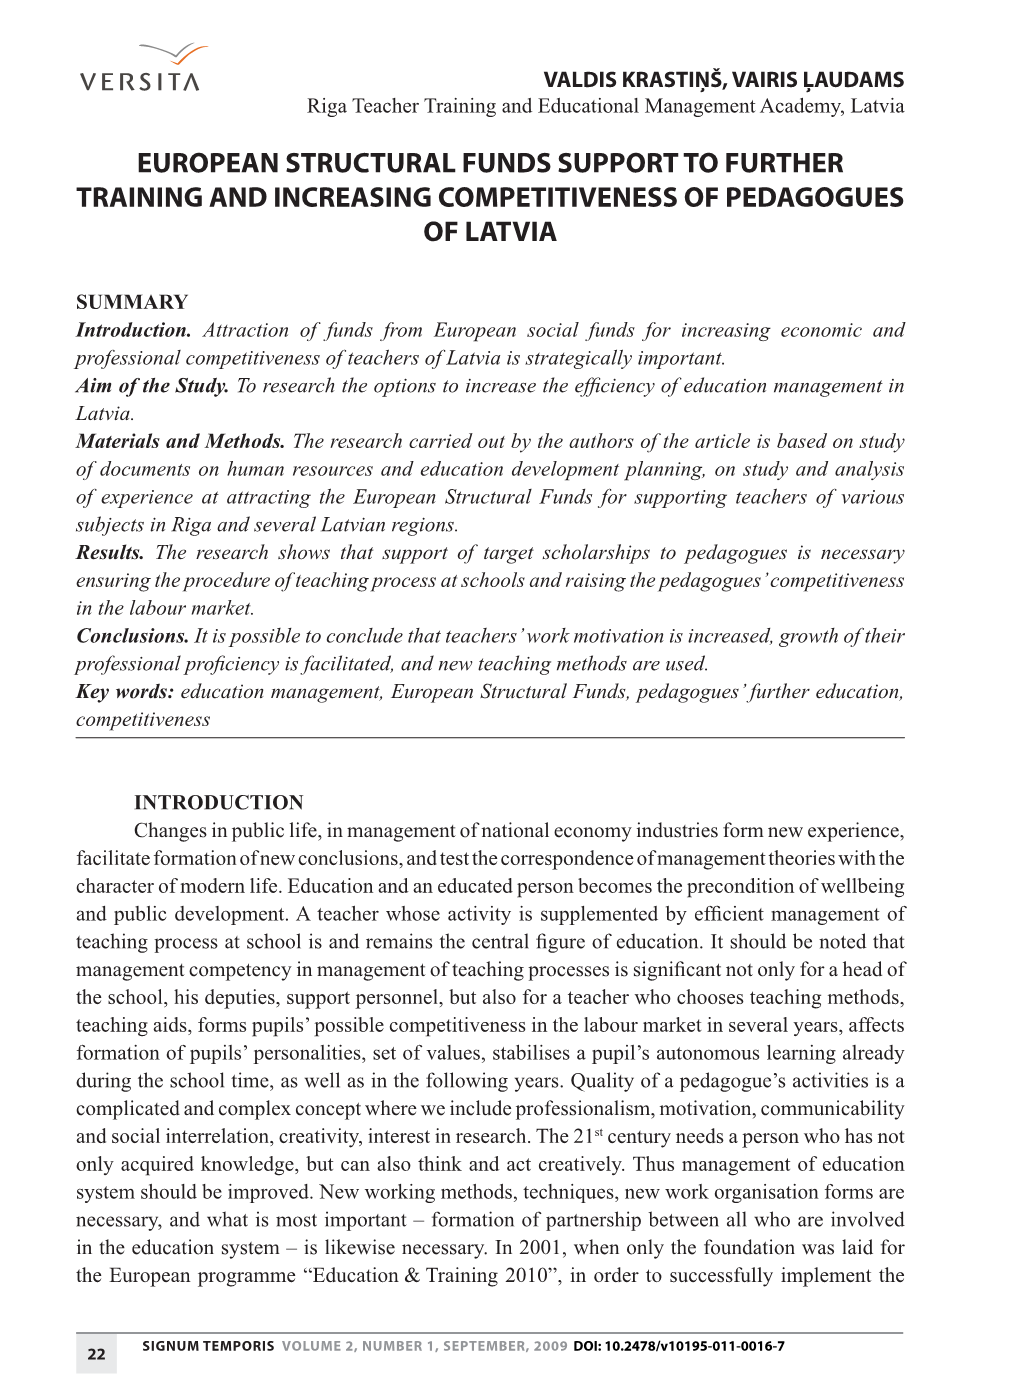 European Structural Funds Support to Further Training and Increasing Competitiveness of Pedagogues of Latvia